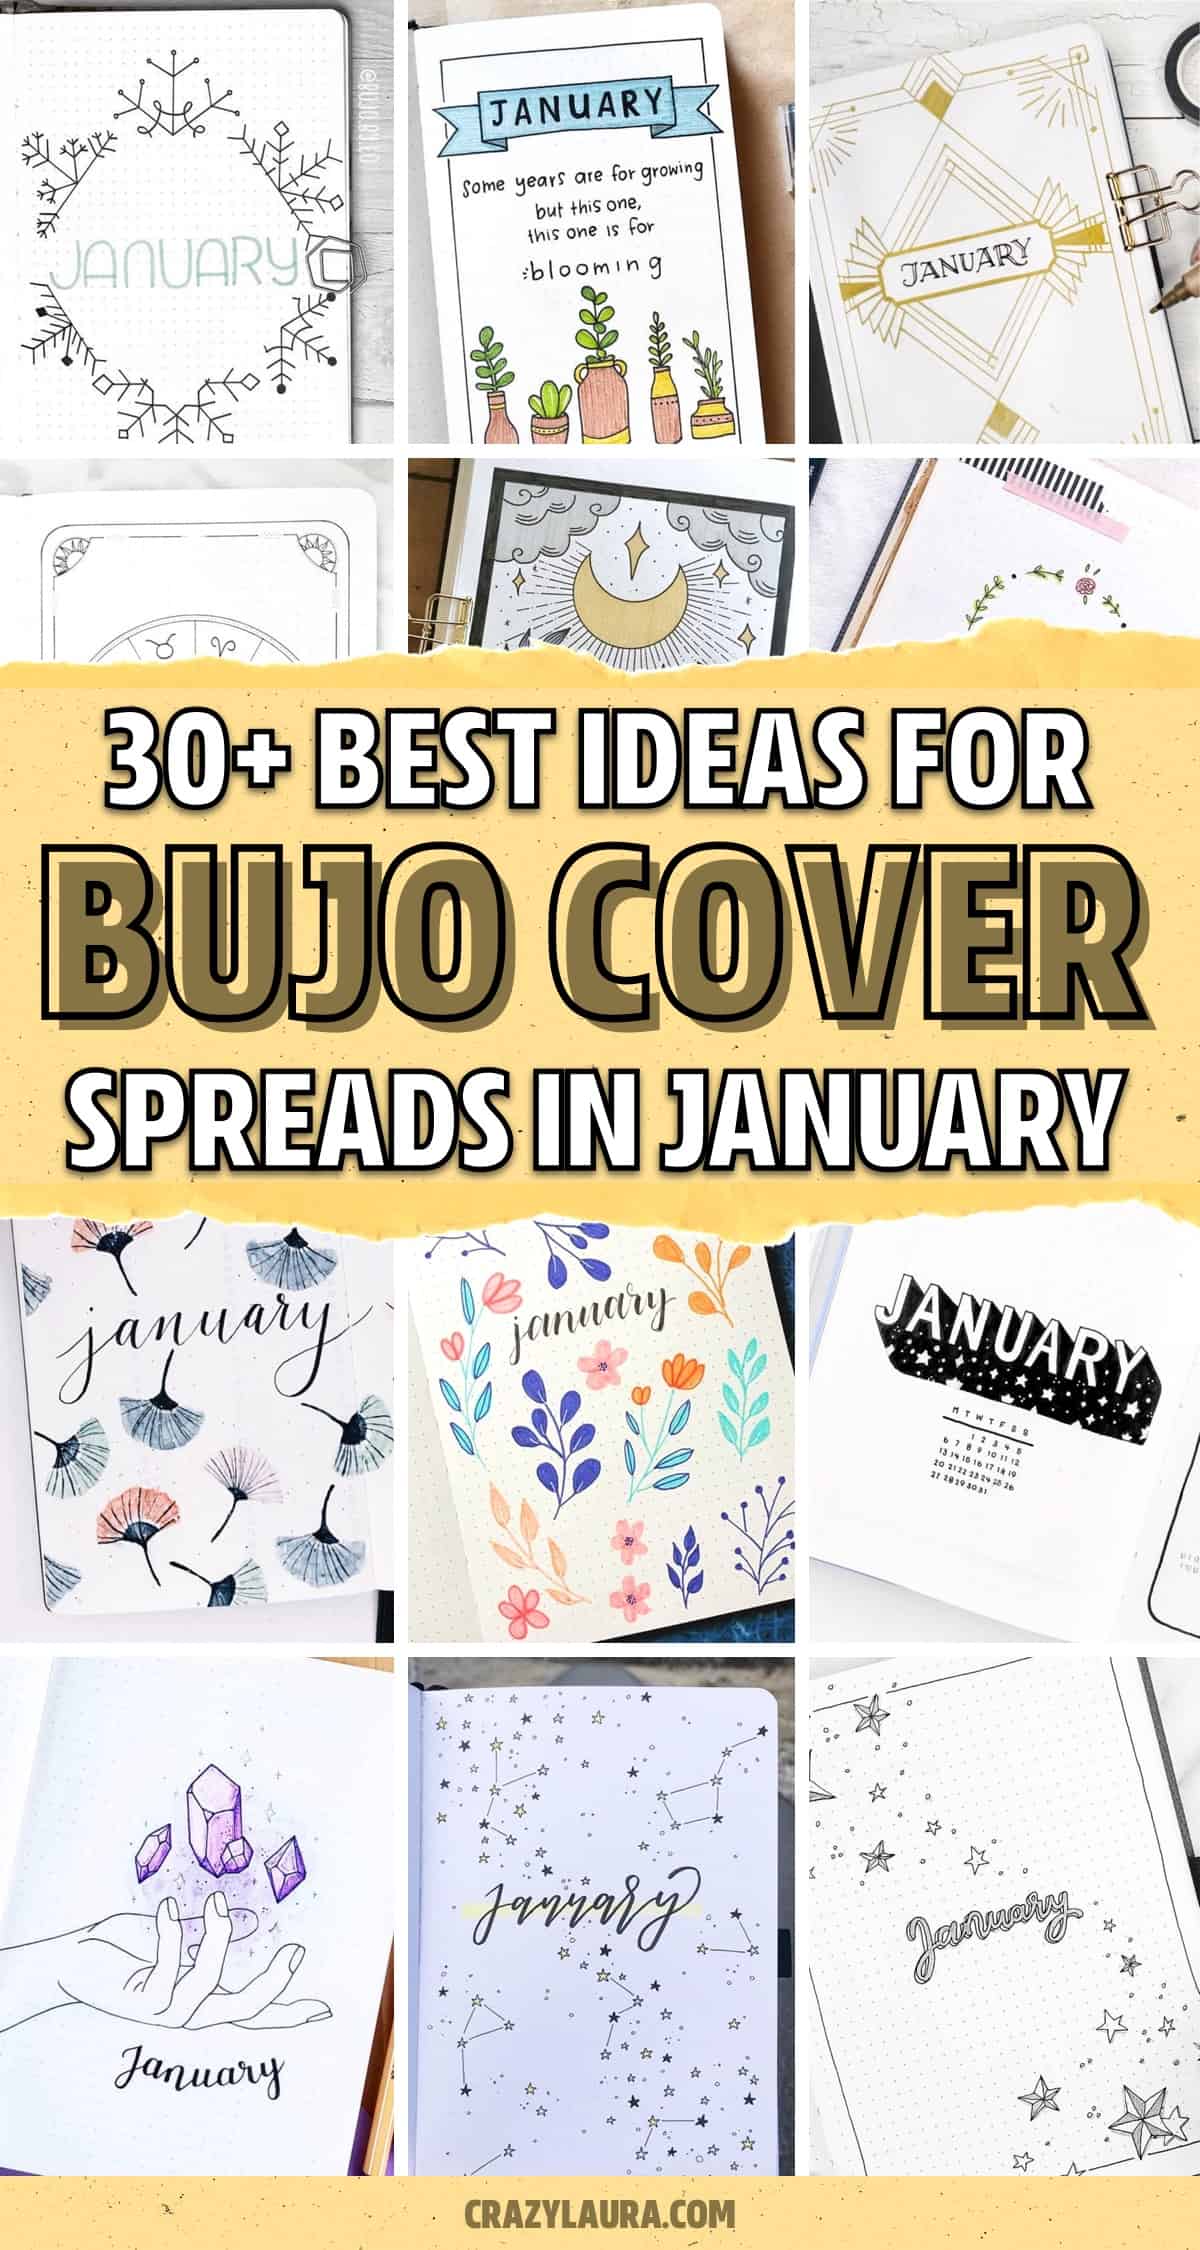 bullet journal hello page ideas for january